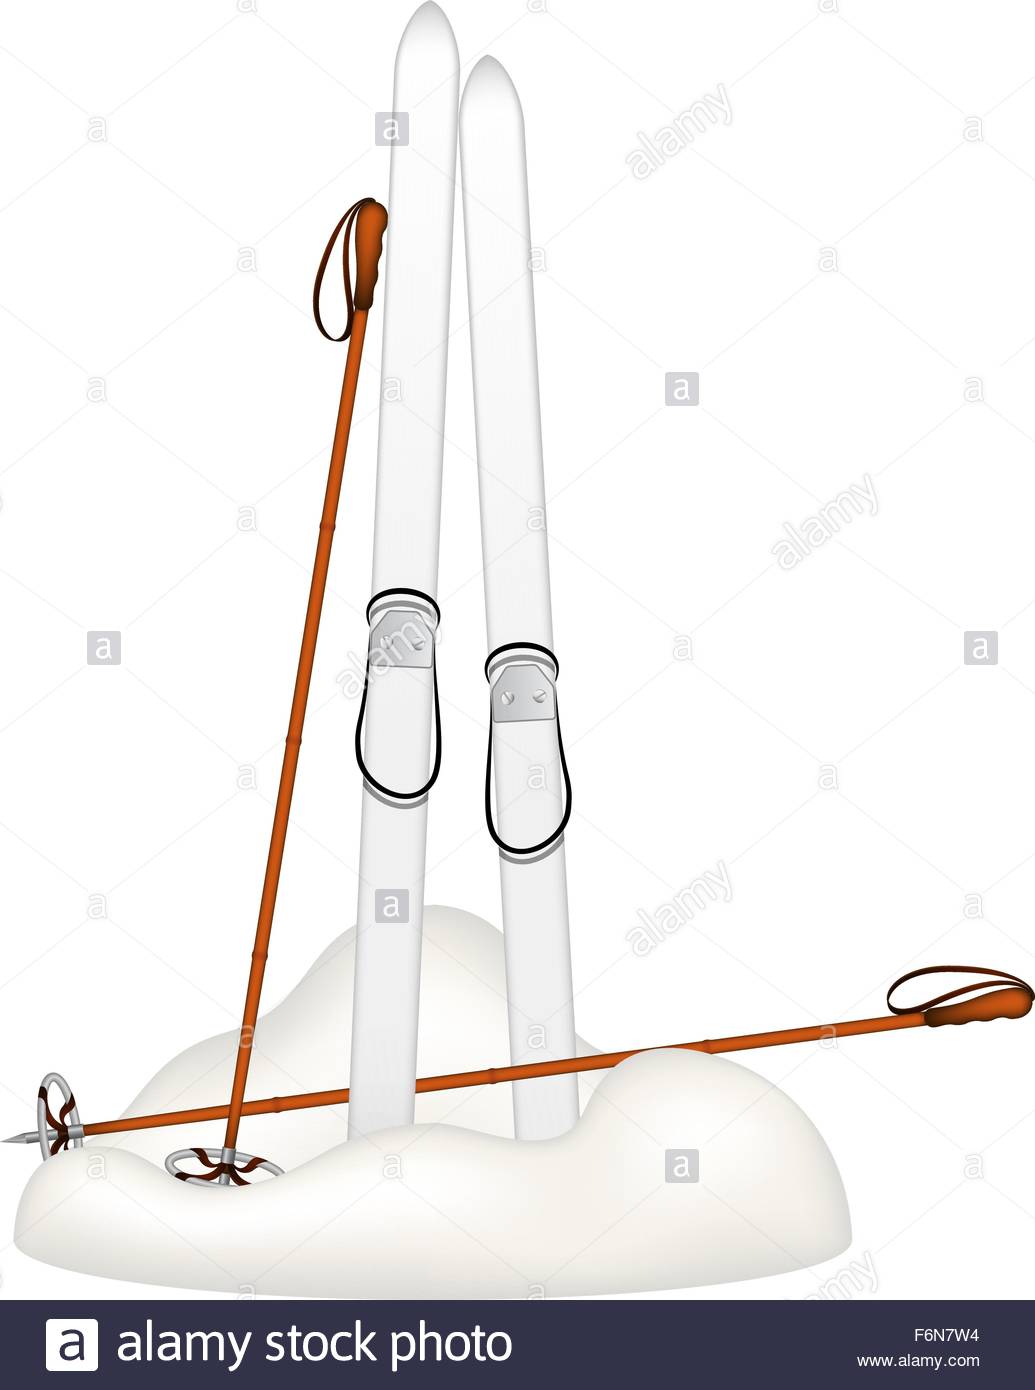 Old Wooden Skis And Old Ski Poles Standing In Snow Stock Vector.